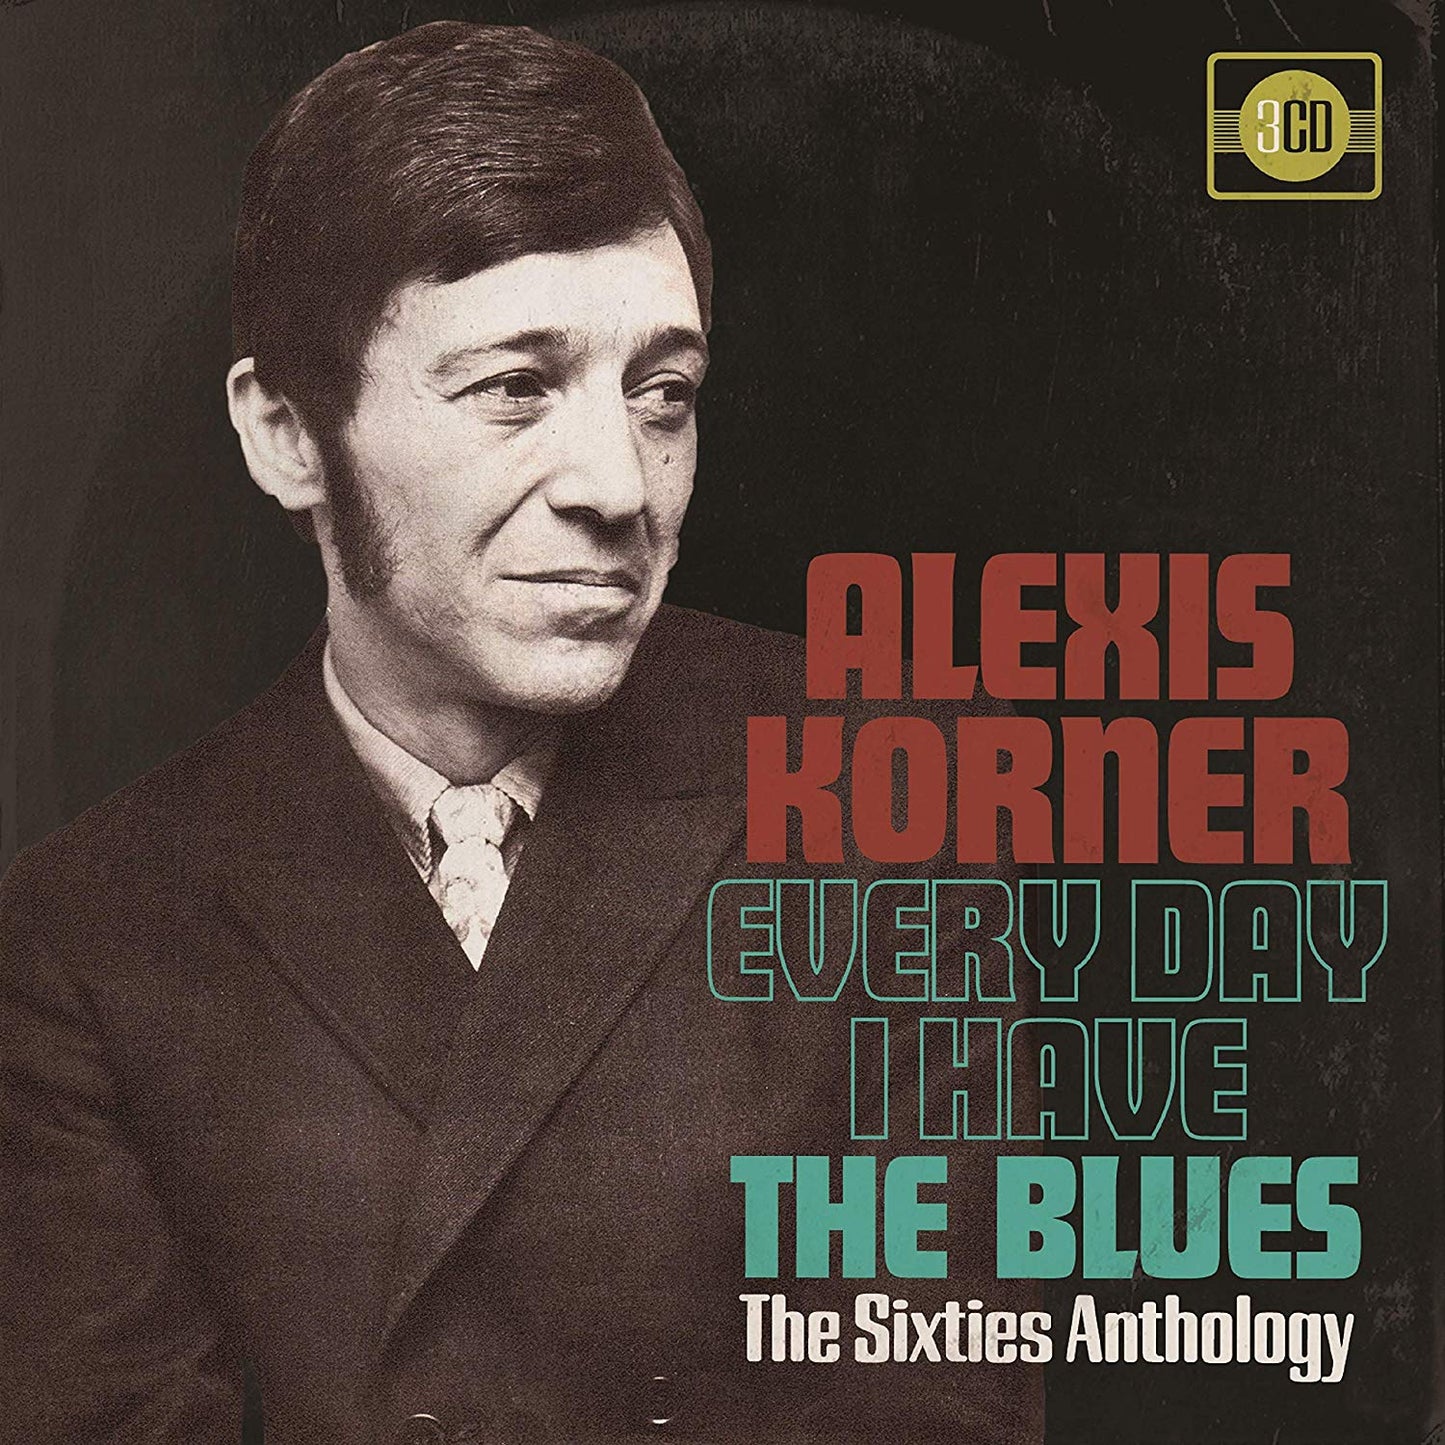 Alexis Korner - Everyday I Have The Blues - The Sixties Anthology - 3CD